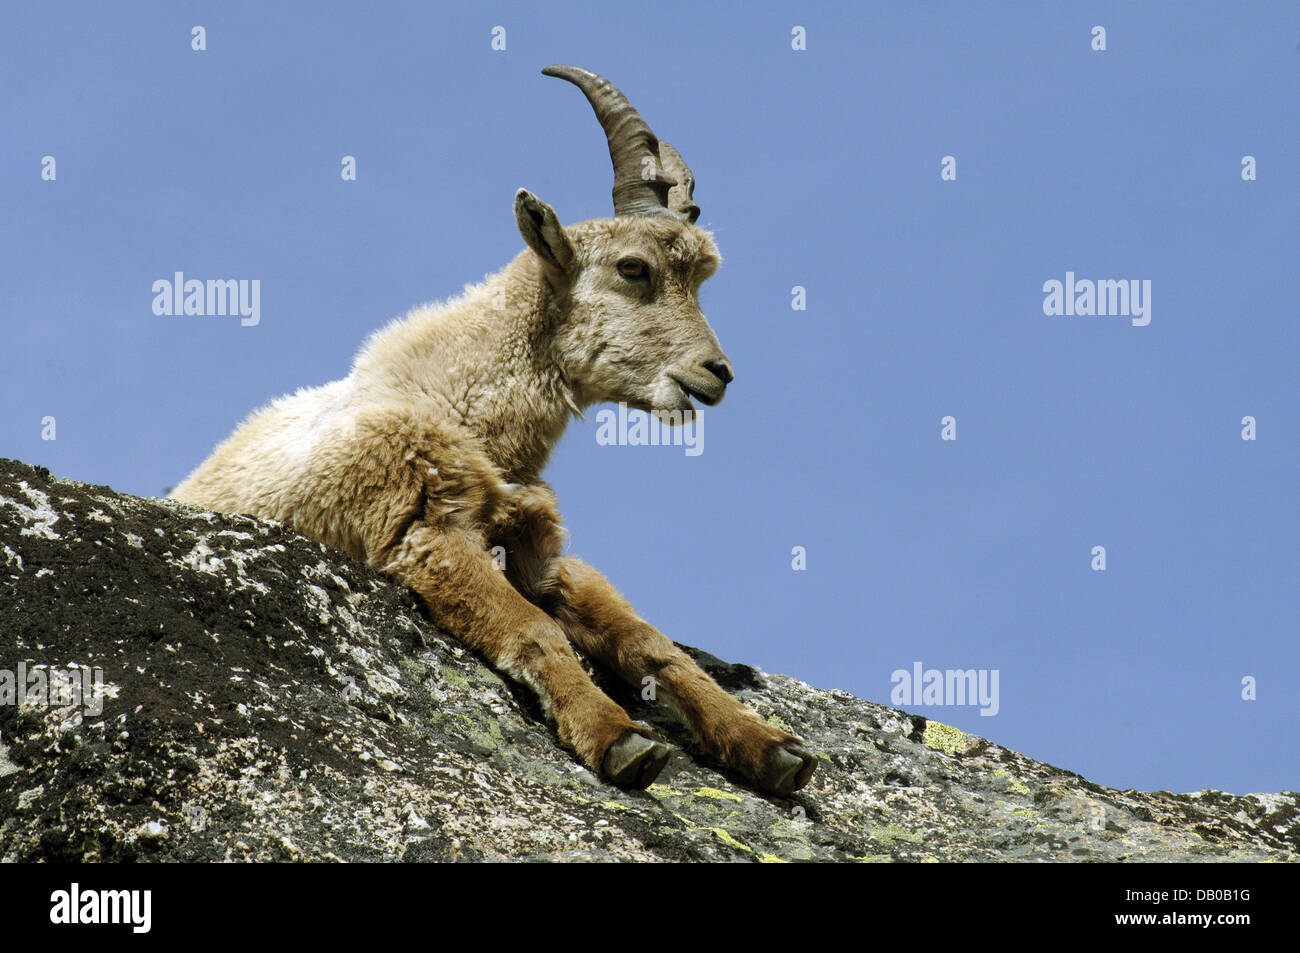 An ibex pictured in the national park Gran Paradiso of the Aosta Valley, Italy, 09 June 2007. Since 1821, the ibex (lat.: Carpa ibex ibex) is a protected animal. Photo: Frank Kleefeldt Stock Photo